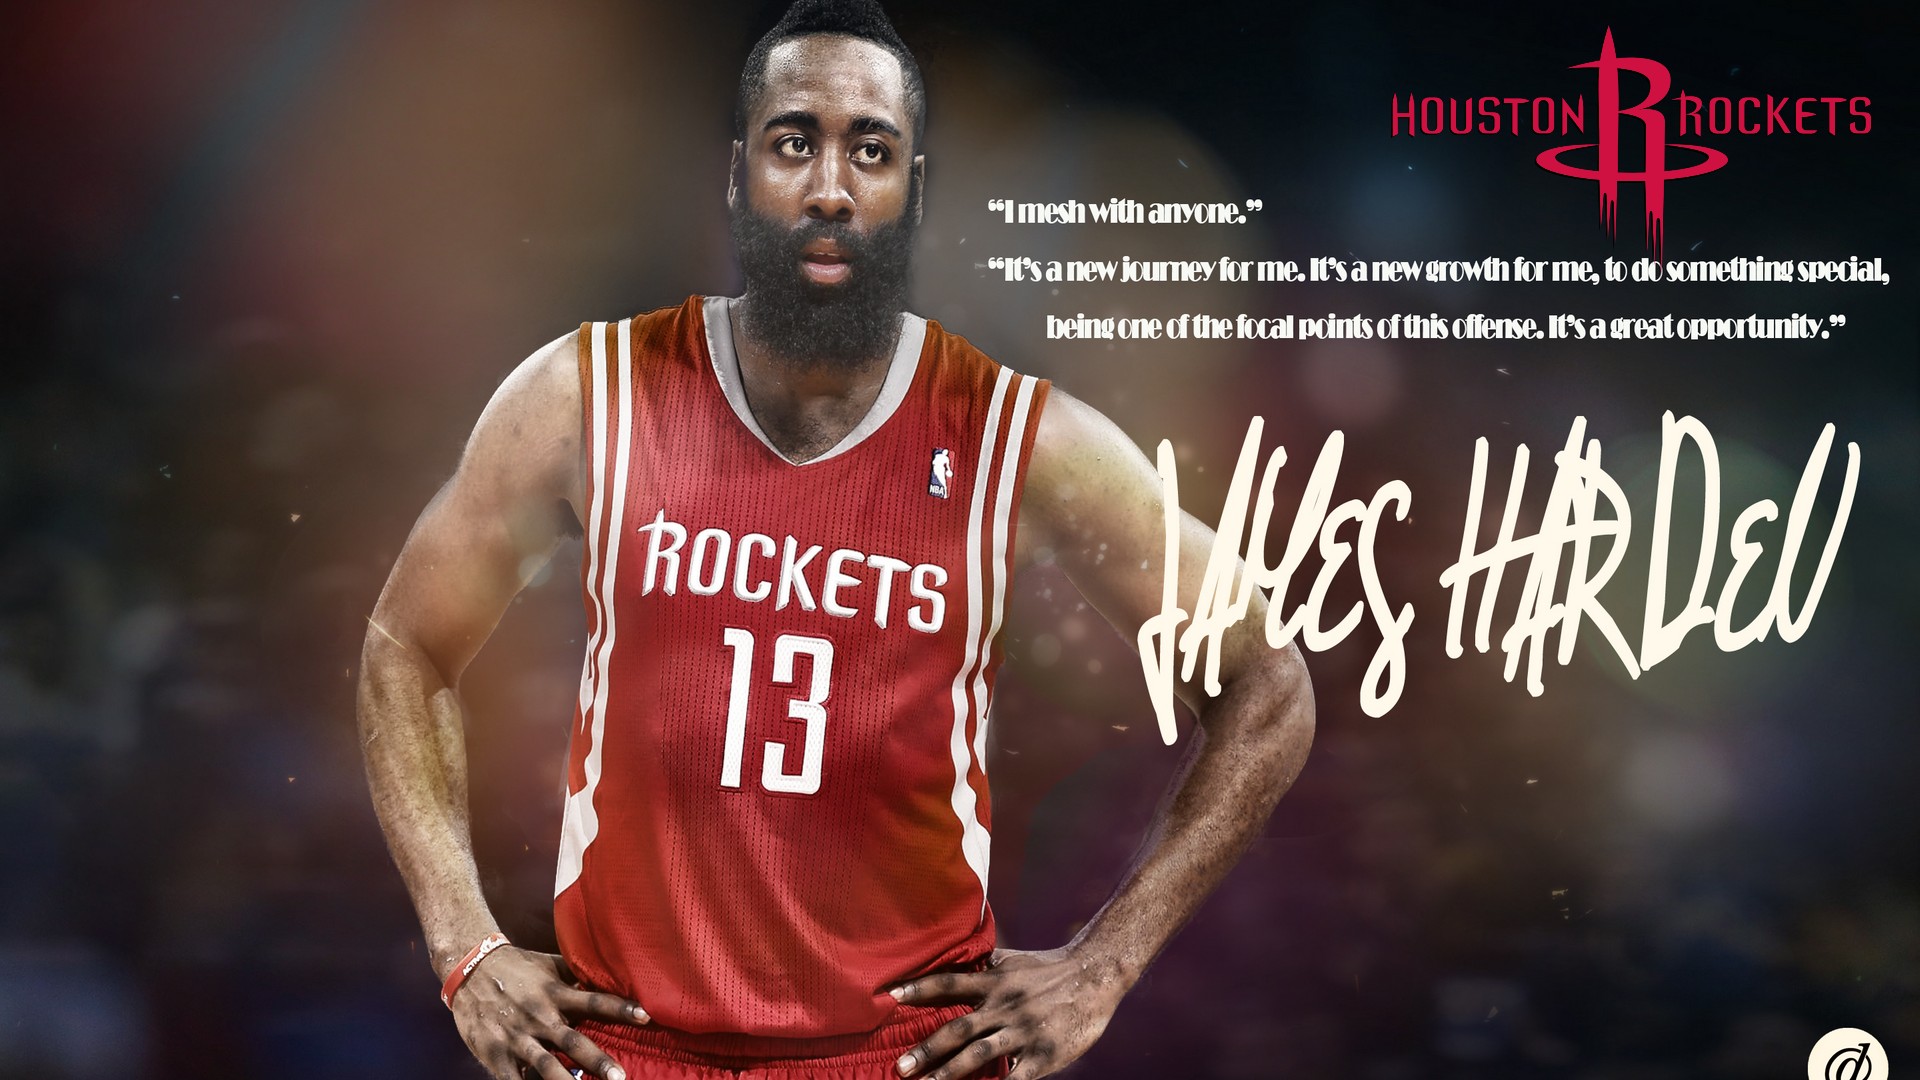 Wallpaper Desktop James Harden HD with image dimensions 1920x1080 pixel. You can make this wallpaper for your Desktop Computer Backgrounds, Windows or Mac Screensavers, iPhone Lock screen, Tablet or Android and another Mobile Phone device